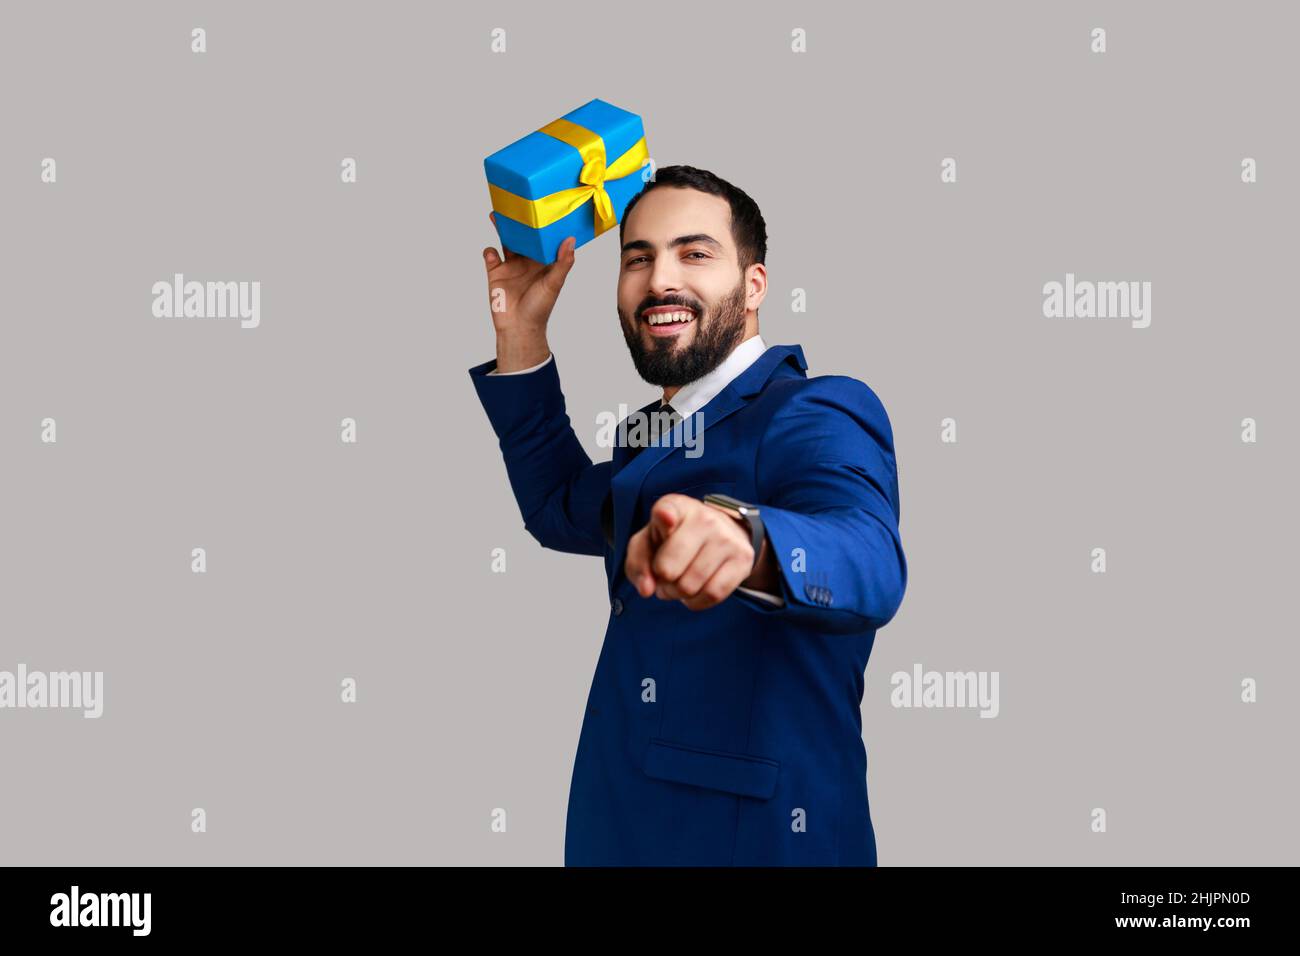 Portrait of smiling positive bearded man being ready to throw birthday box, having fun and sharing gift, wearing official style suit. Indoor studio shot isolated on gray background. Stock Photo